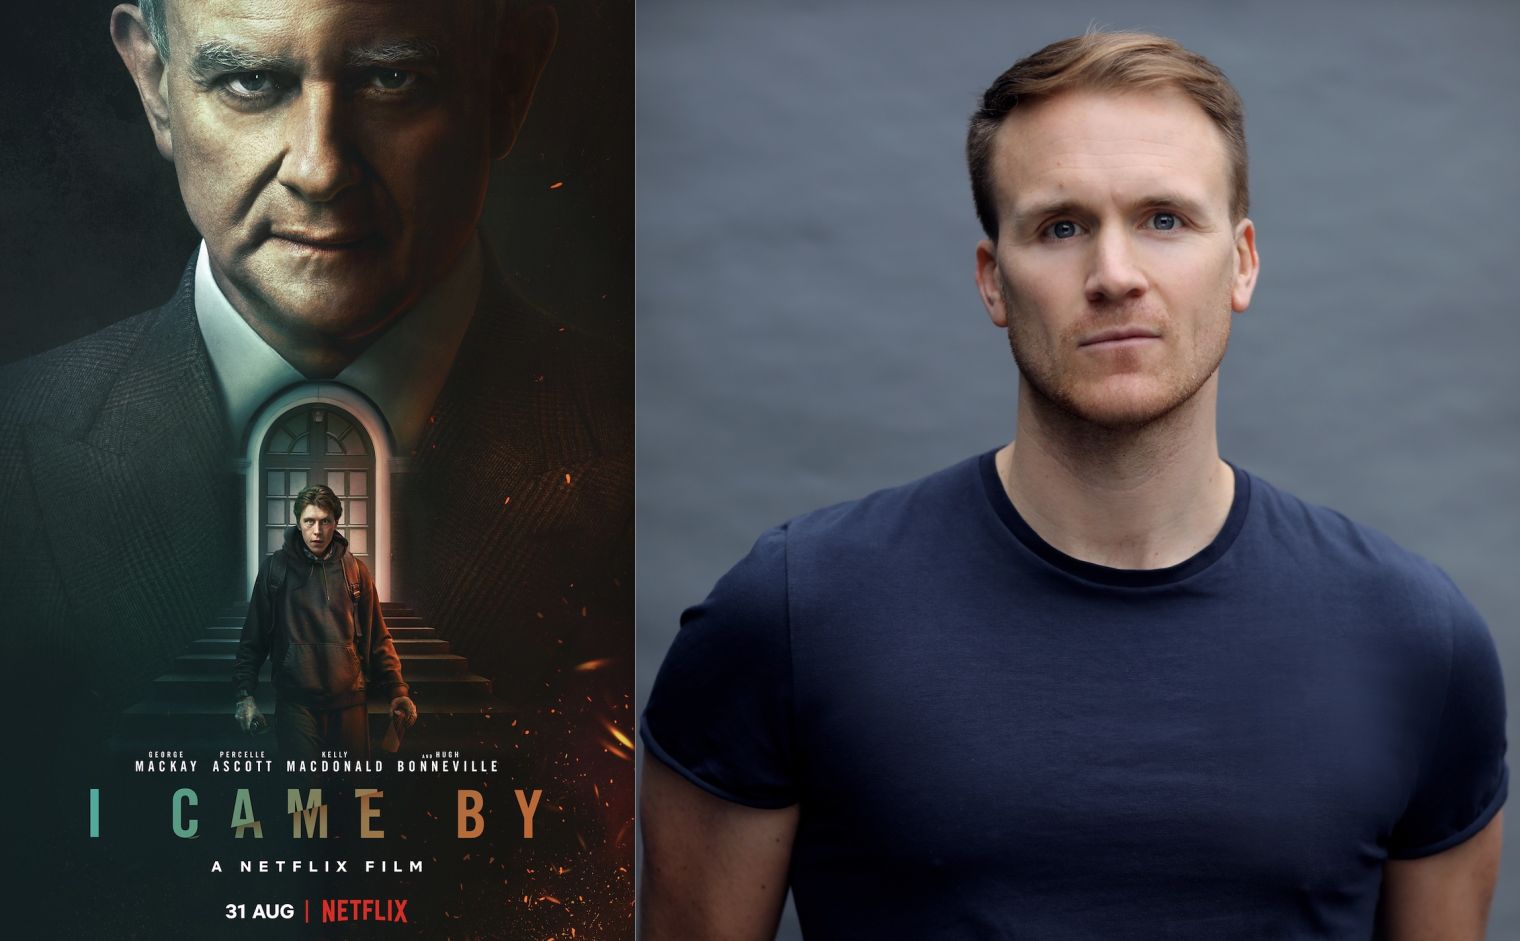 Paddy Wallace appears in Netflix's new suspense thriller 'I Came By' which is released on Netflix today